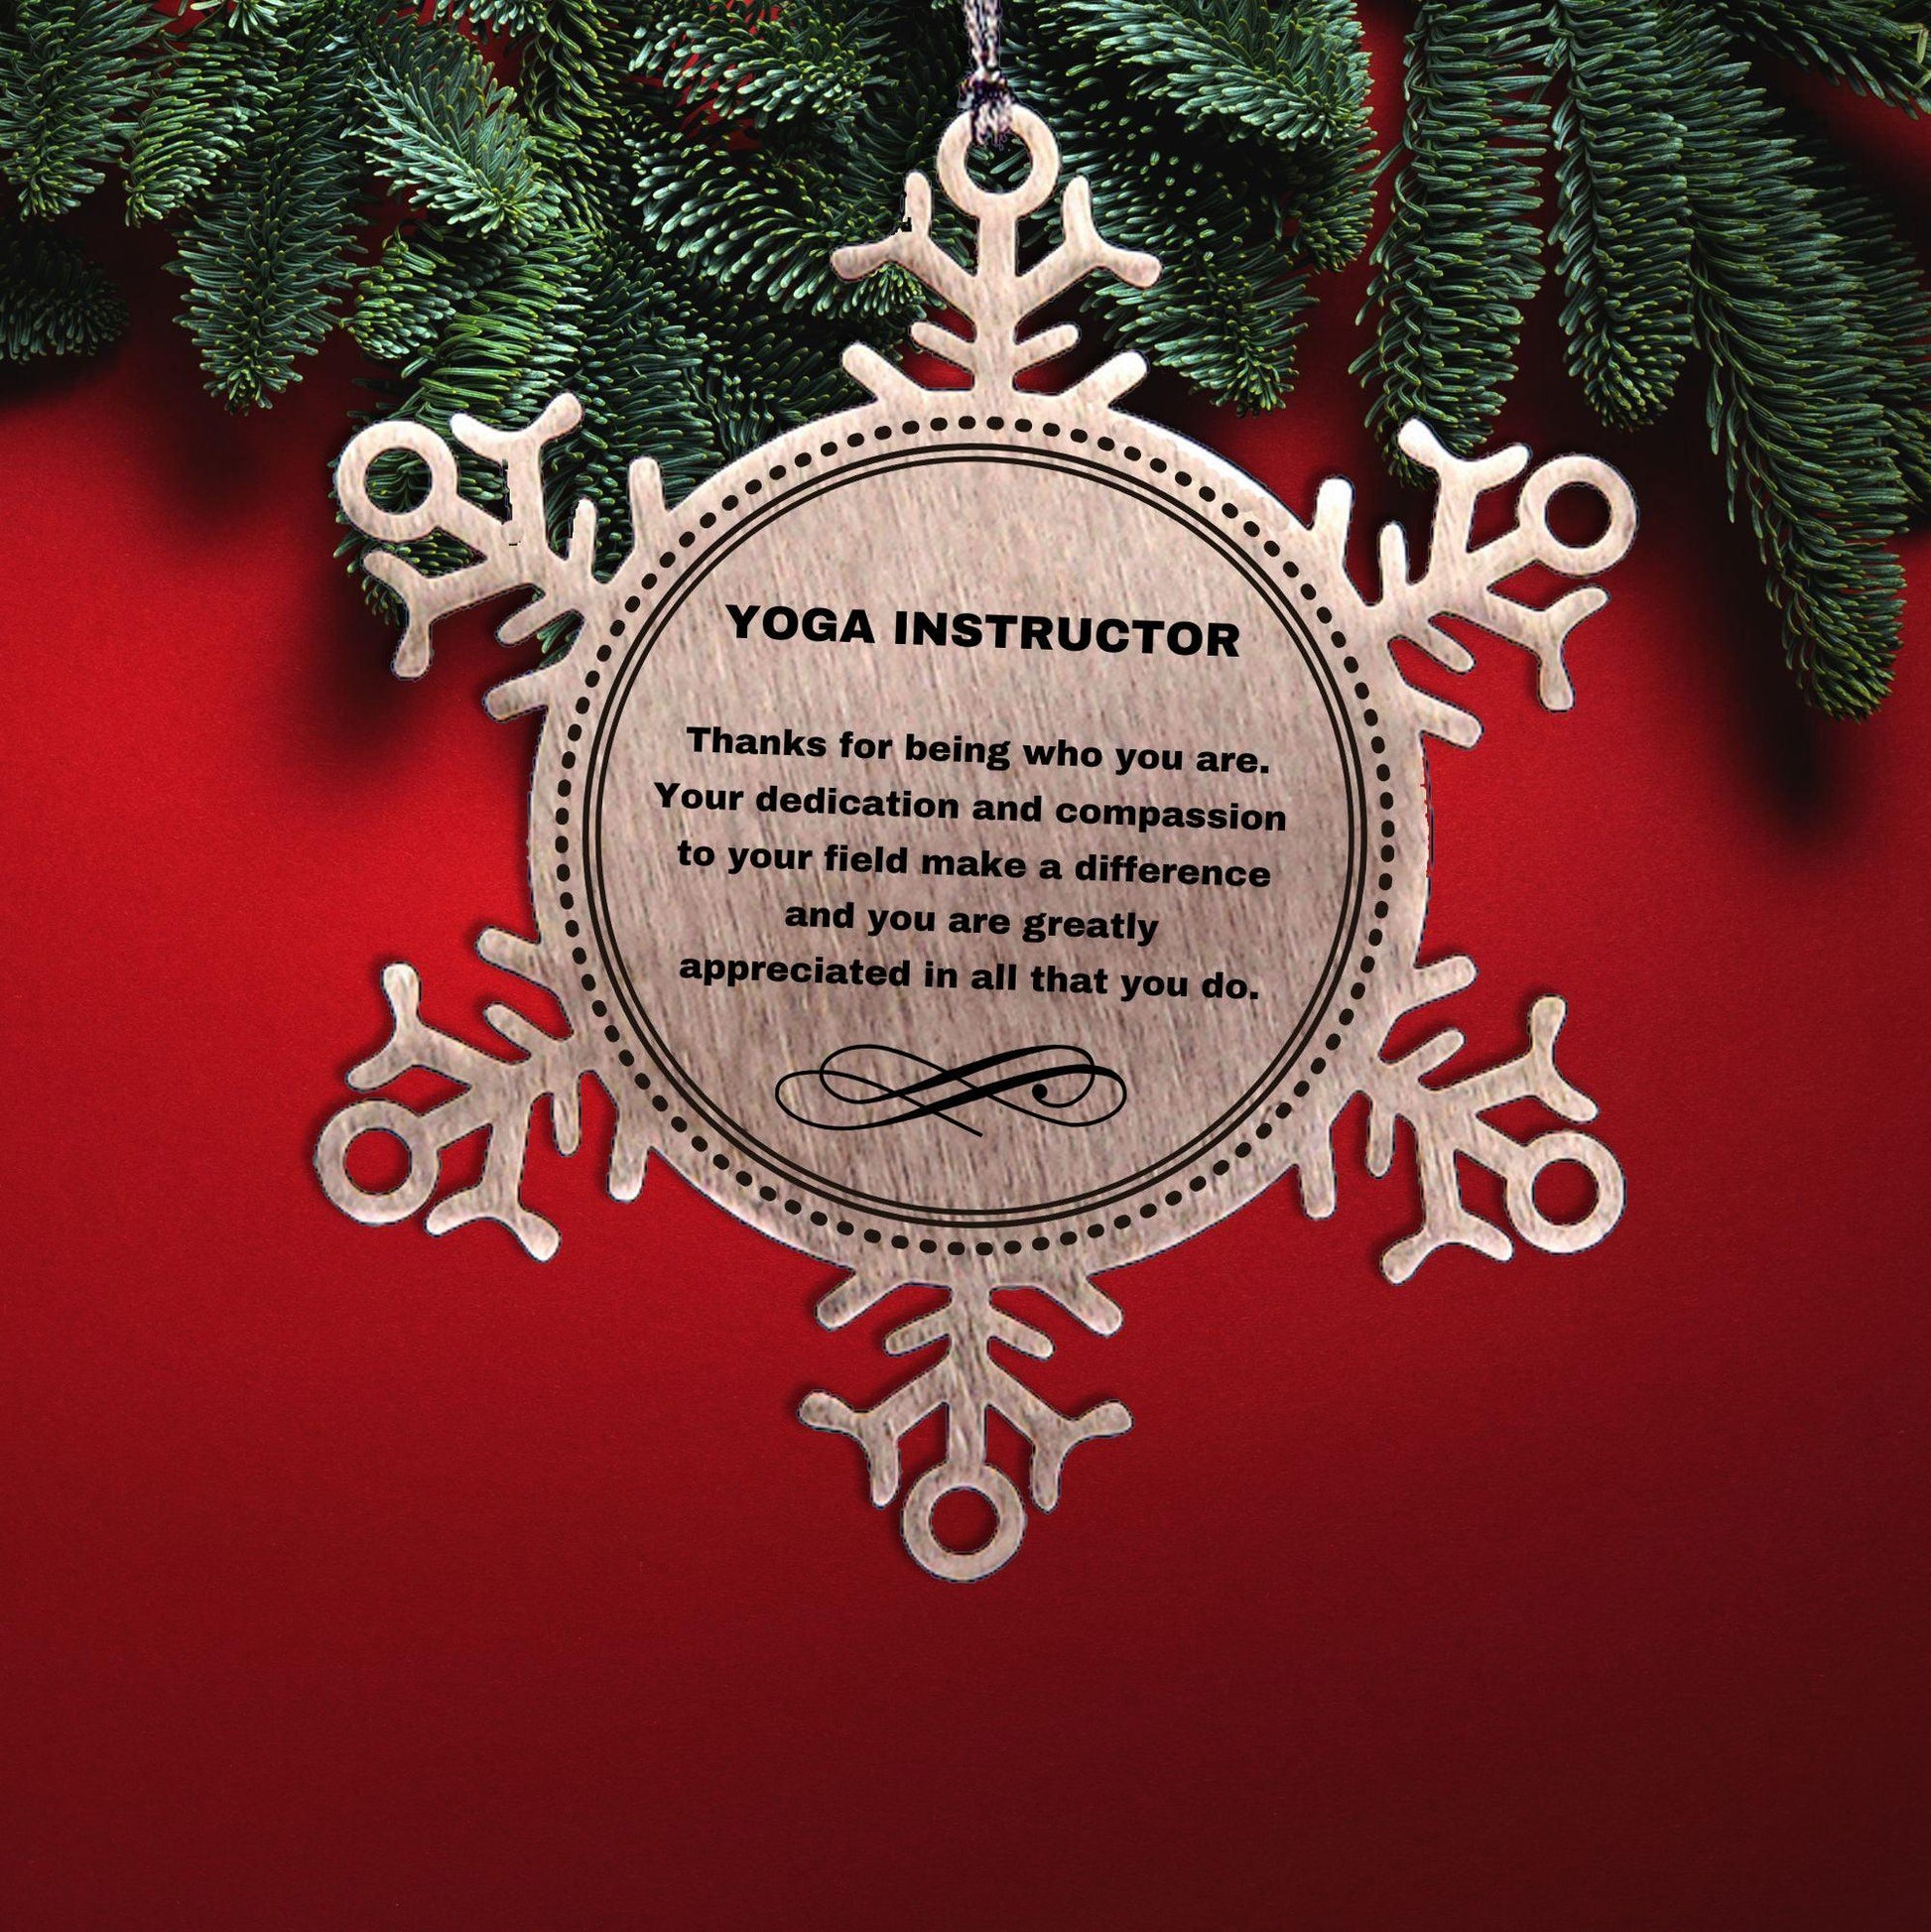 Yoga Instructor Snowflake Ornament - Thanks for being who you are - Birthday Christmas Jewelry Gifts Coworkers Colleague Boss - Mallard Moon Gift Shop